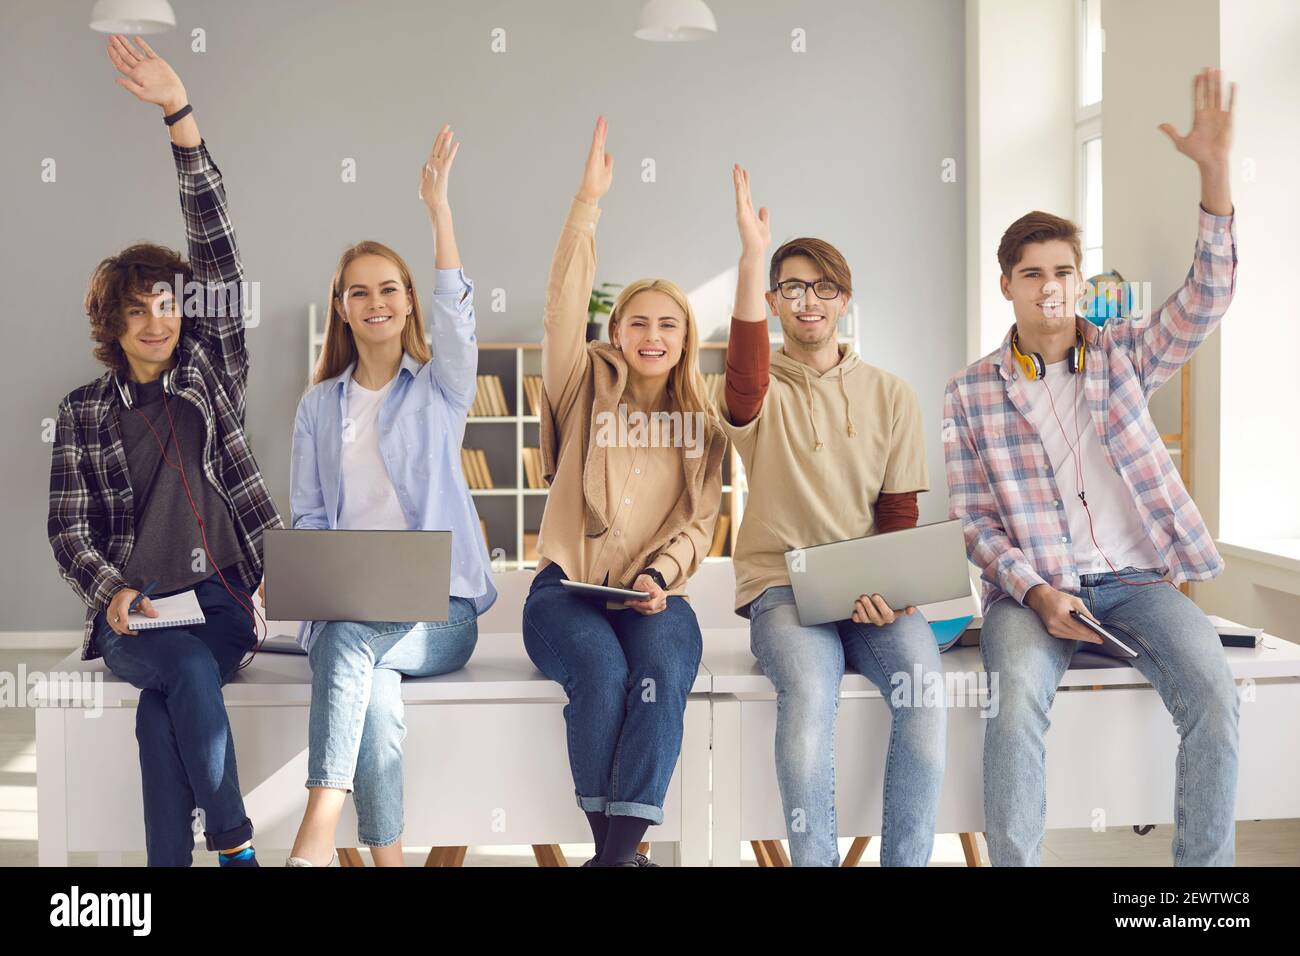 Group of happy active school or college students sitting on desk and raising hands Stock Photo